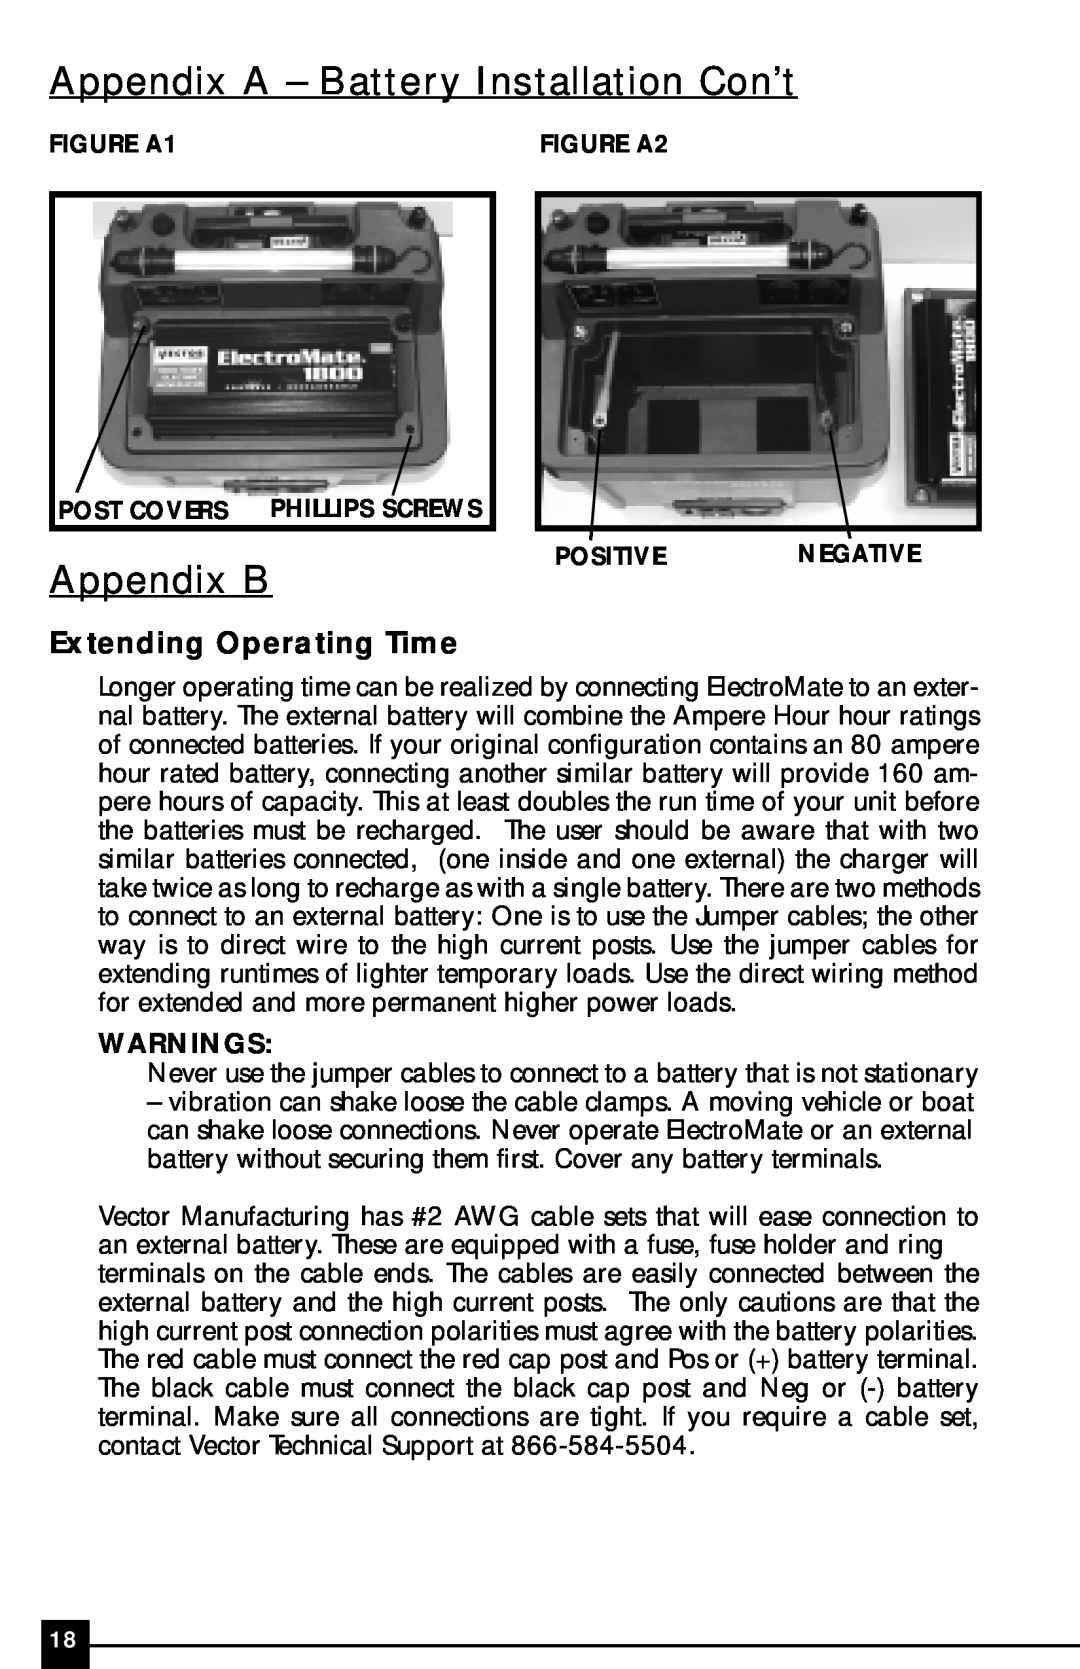 Vector VEC097 owner manual Appendix A - Battery Installation Con’t, Appendix B, Extending Operating Time, Warnings 